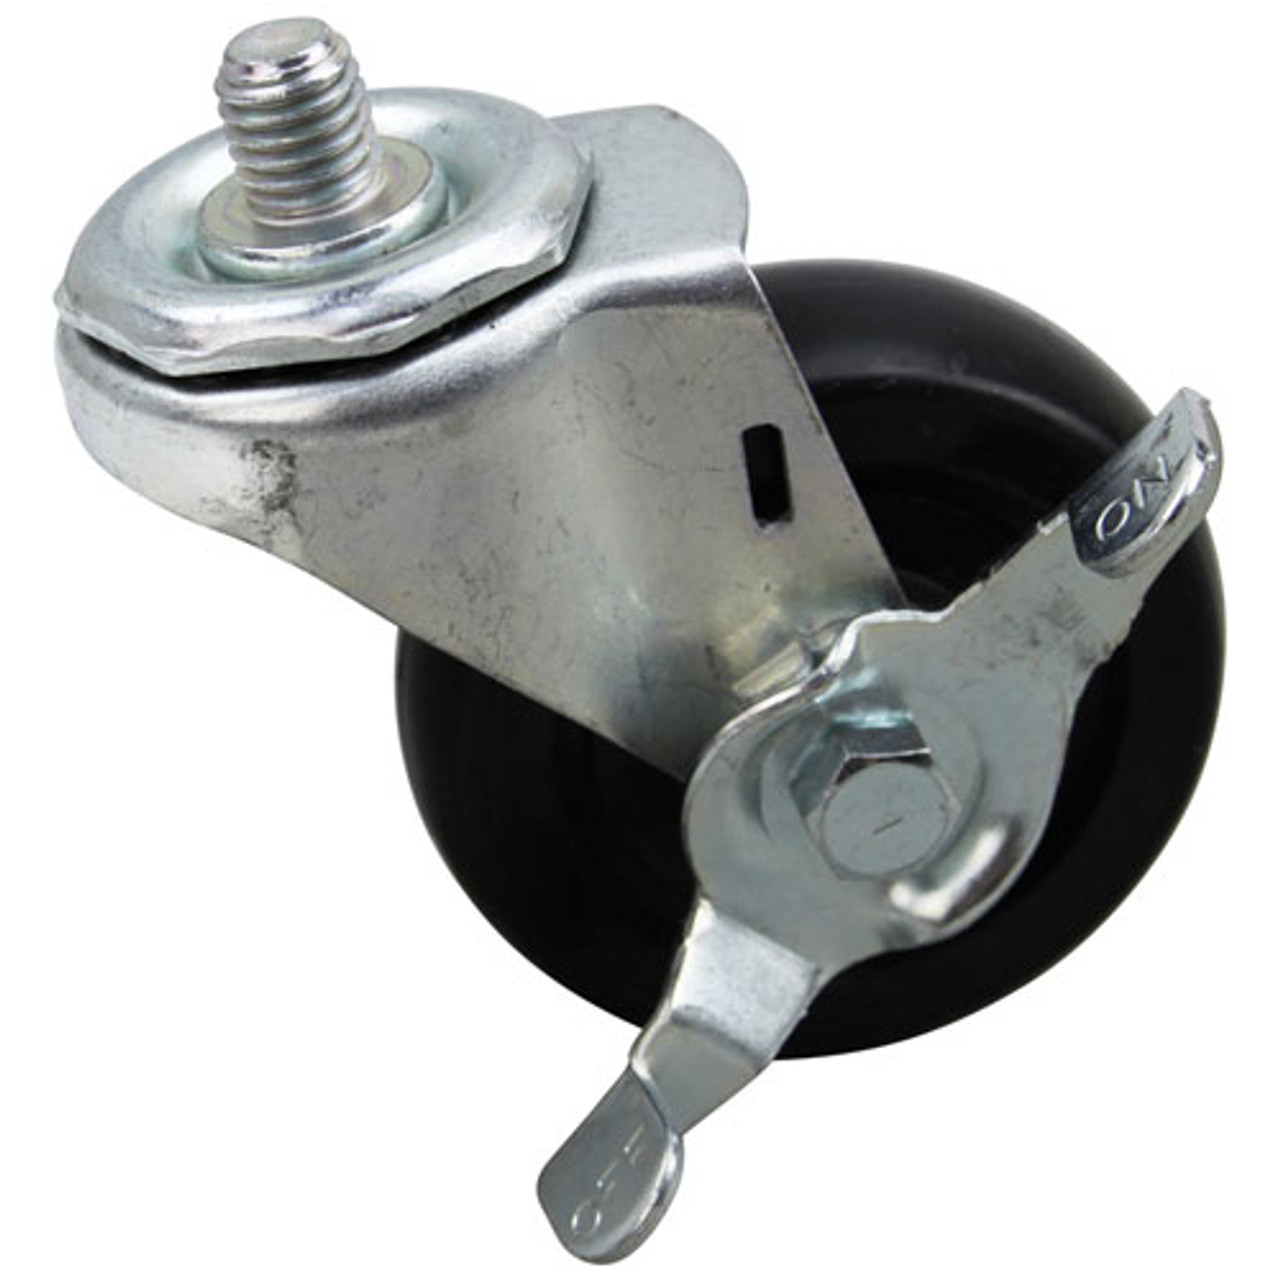 Caster W/Brake - Replacement Part For Delfield MCC13270